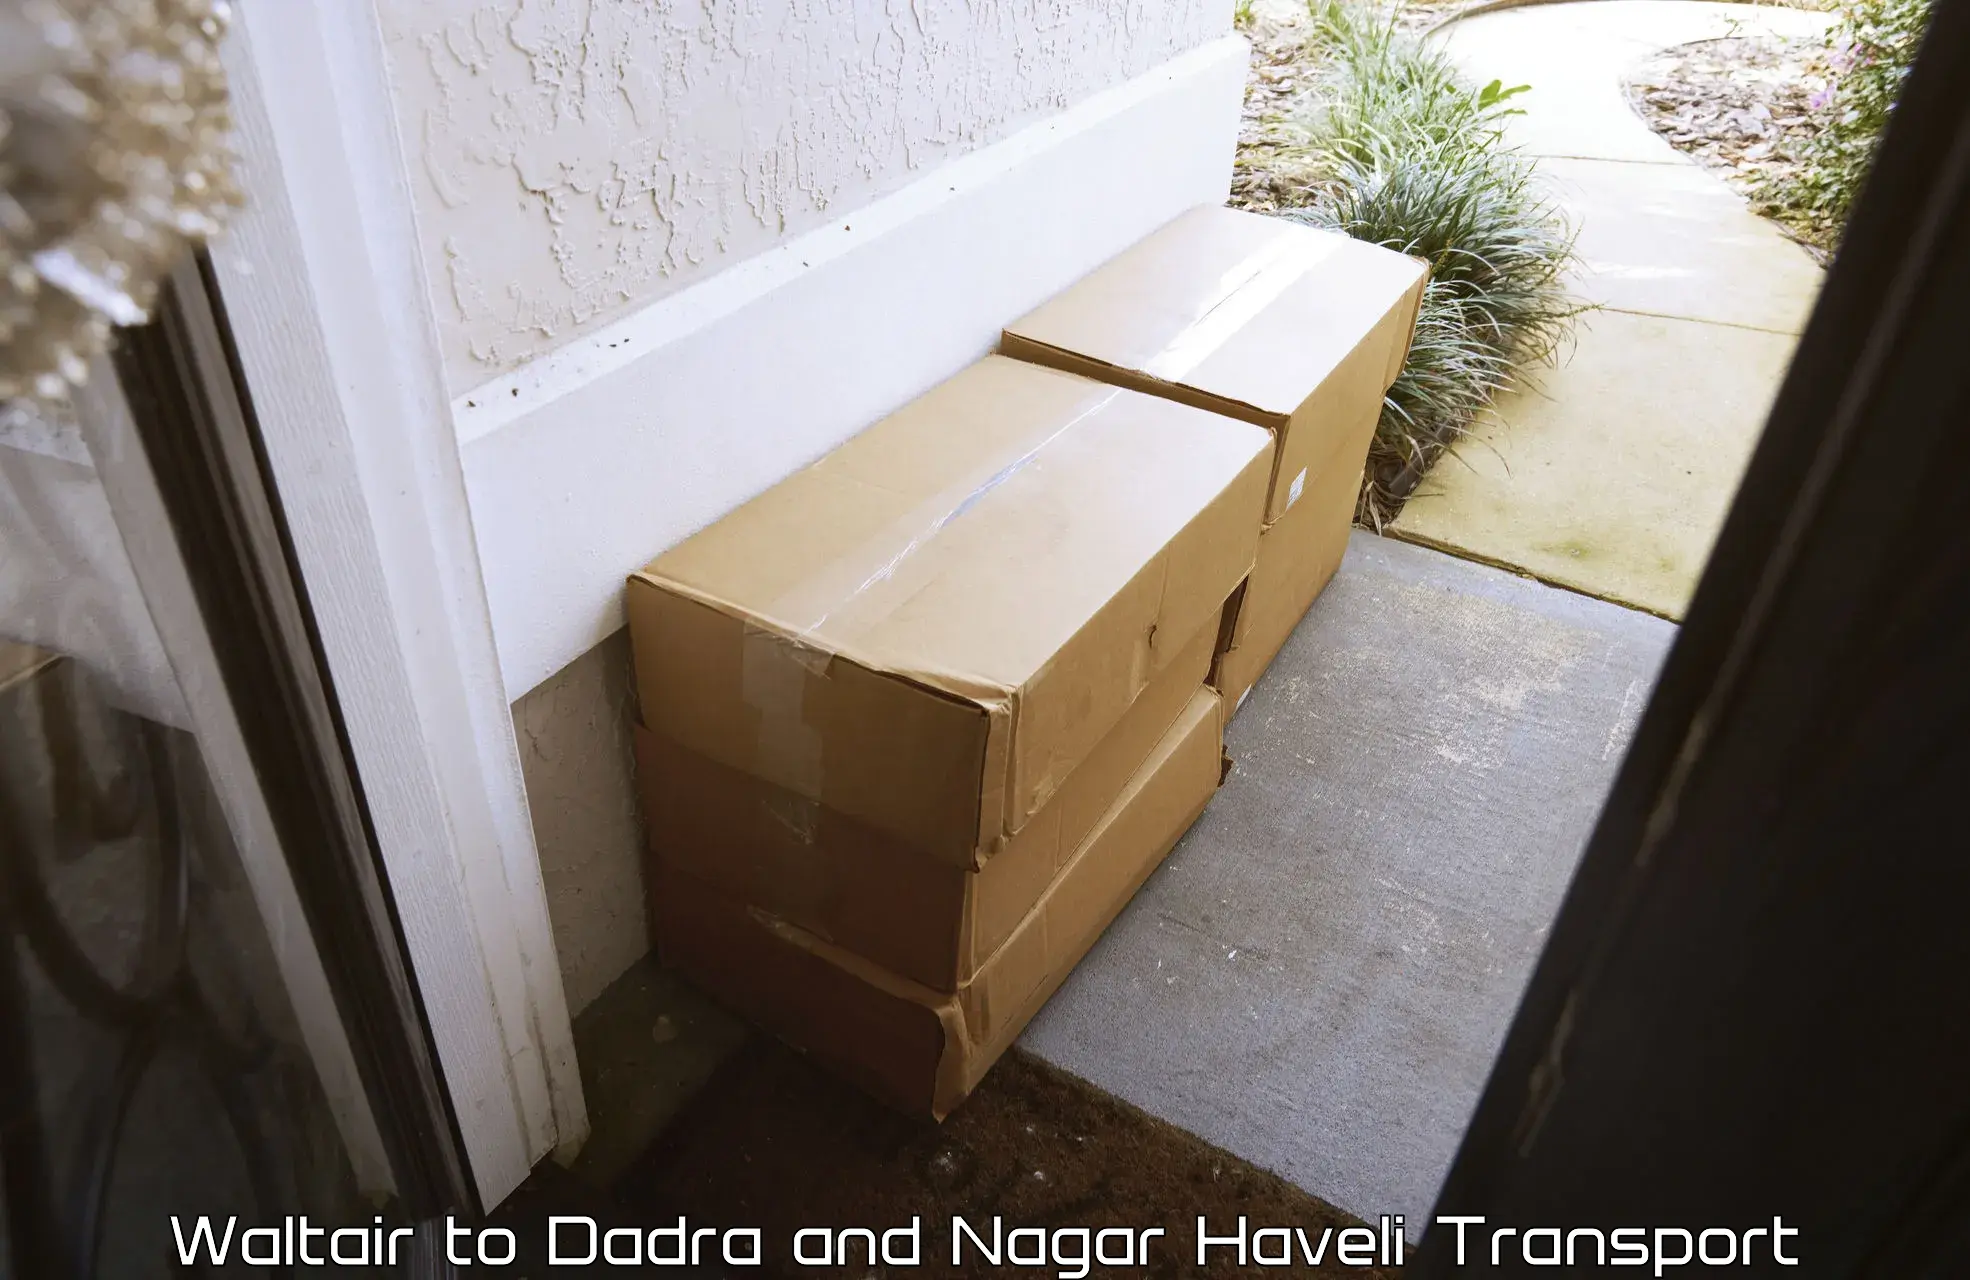 Nationwide transport services Waltair to Dadra and Nagar Haveli